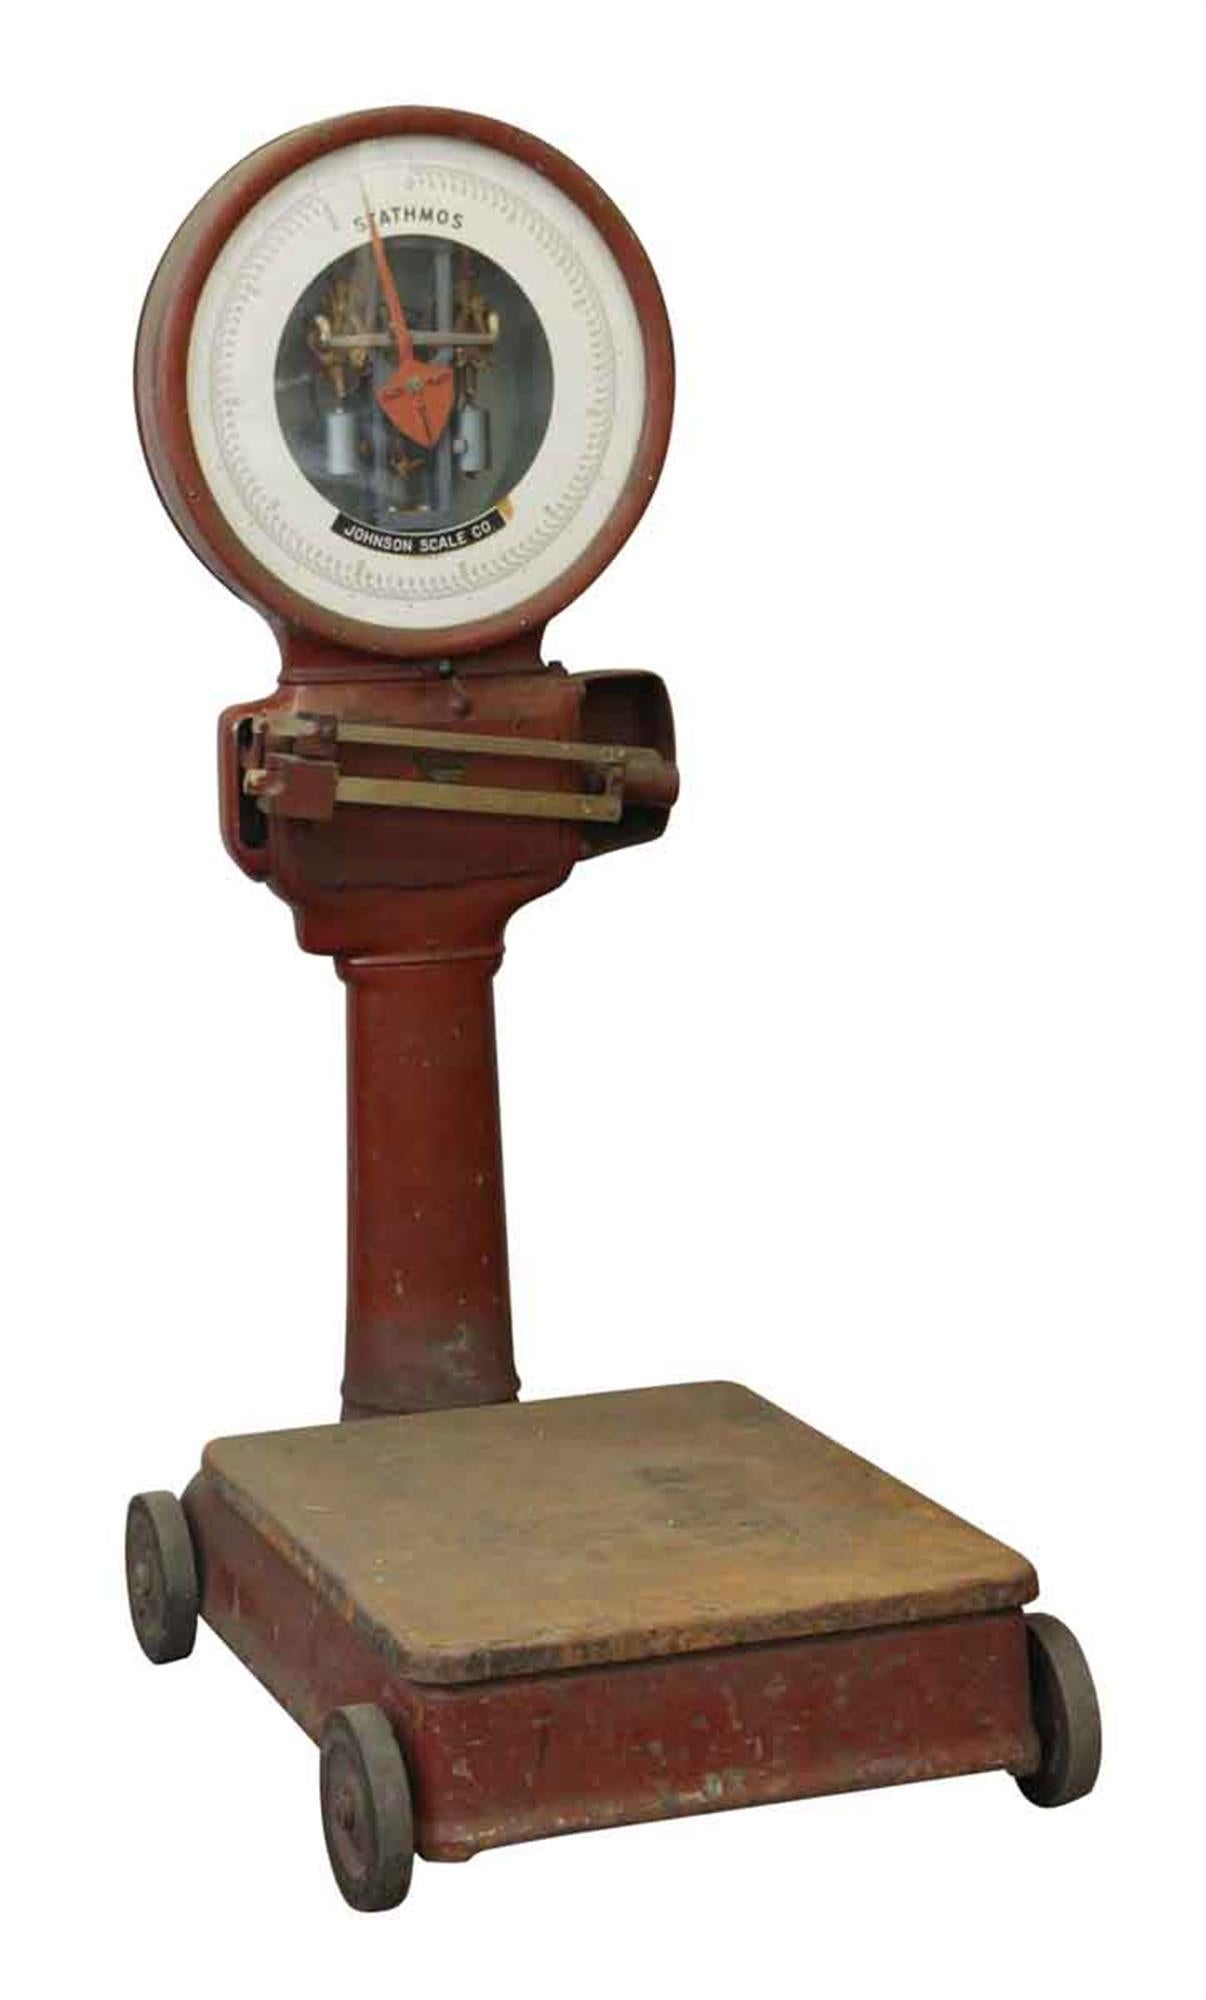 1920s large red Johnson Scale Co. Stathmos scale with wheels. This can be seen at our 400 Gilligan St location in Scranton, PA